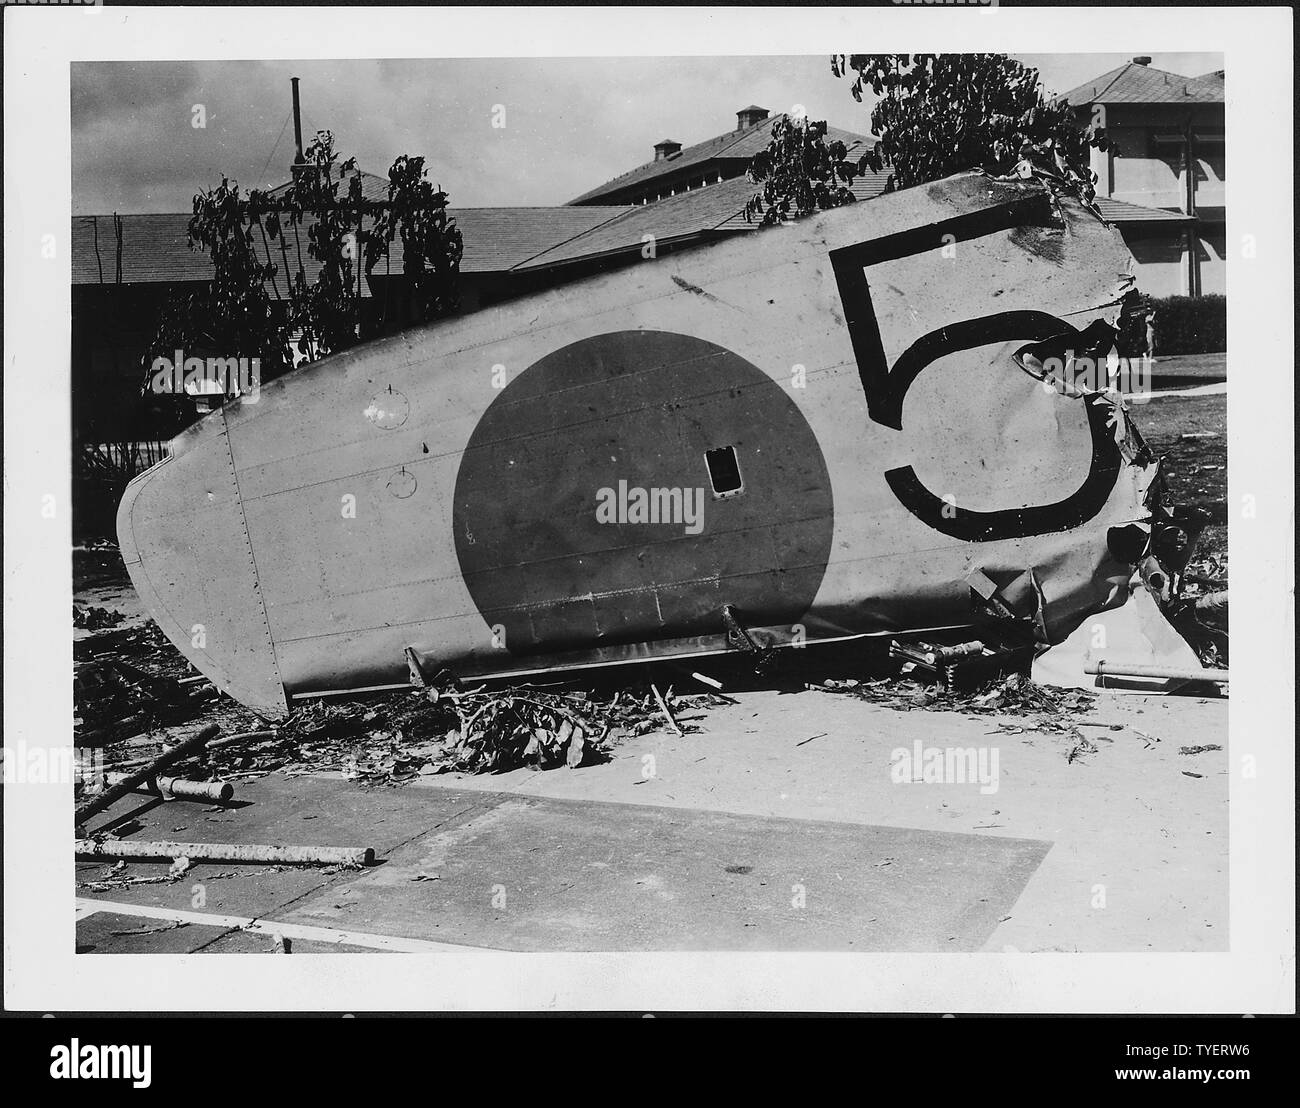 Photograph of a wing from a Japanese bomber shot down on the grounds of the Naval Hospital, Honolulu, Territory of Hawaii, during the attack on Pearl Harbor; General notes:  Wing of Japanese Nakajima B5N Type 97 torpedo bomber of from the aircraft carrier Kaga that crashed at Naval Hospital, Pearl Harbor, Hawaii, on 7 December 1941. The rising sun insignia later almost disappeared because of souvenir hunters. Stock Photo